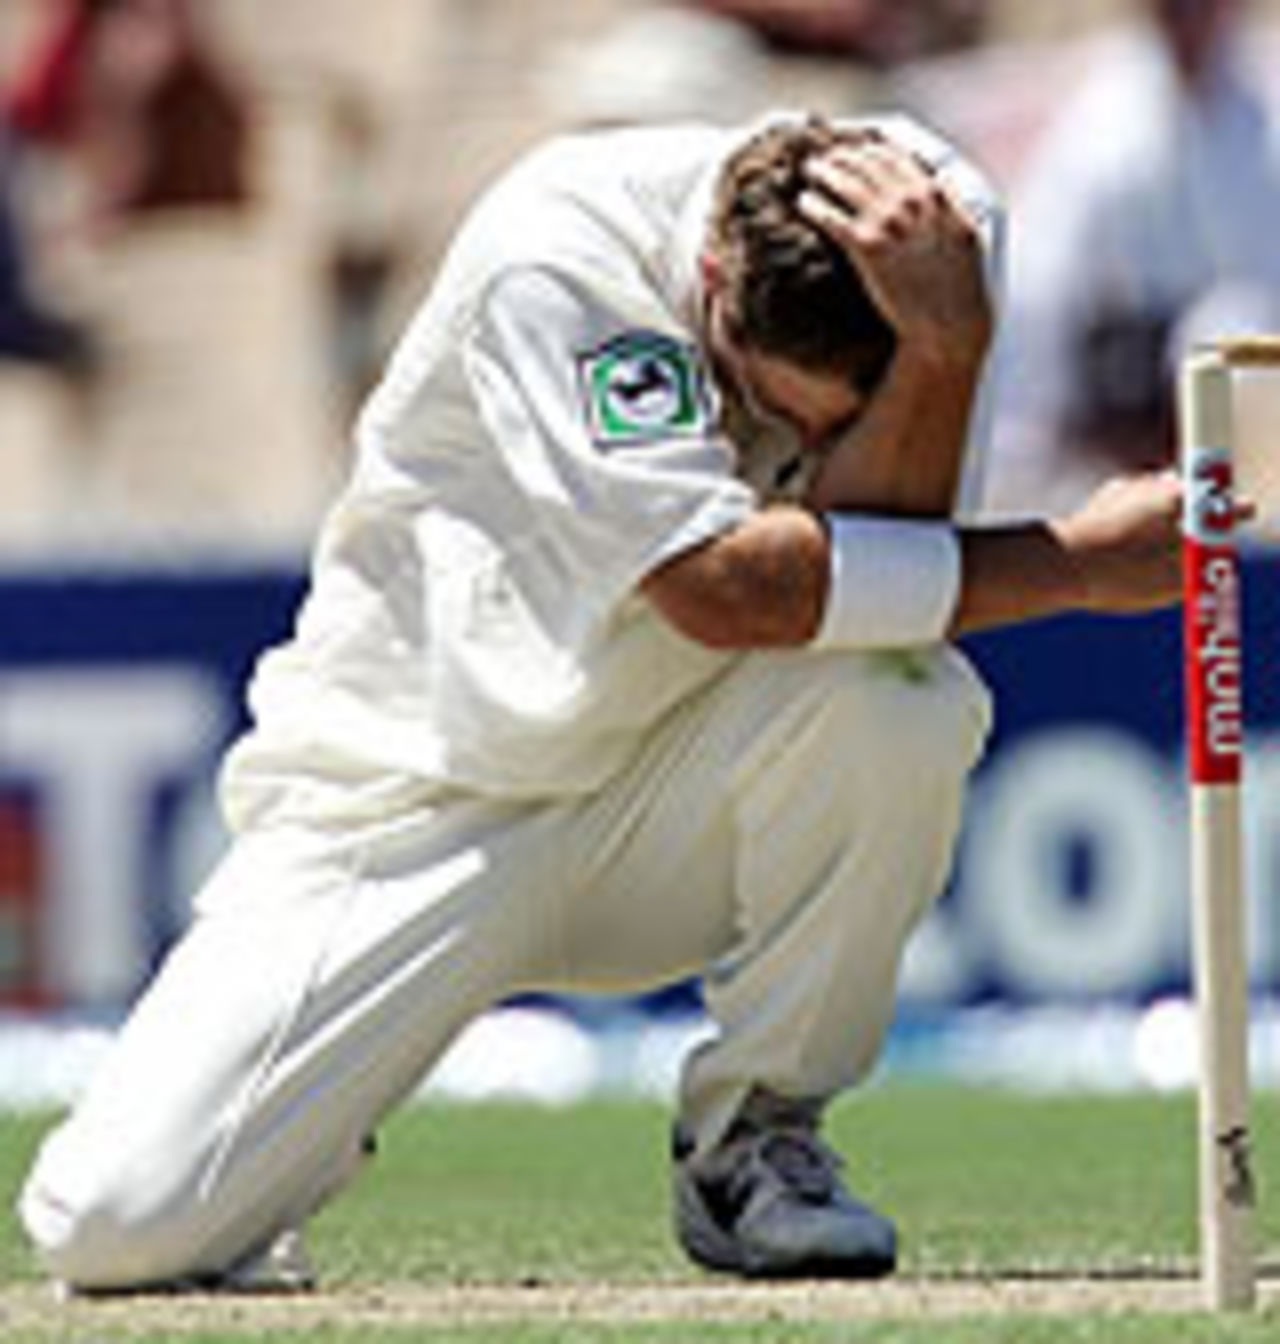 Daniel Vettori can't hide his frustration, as Australia take control of the second Test against New Zealand, Adelaide, November 25, 2004